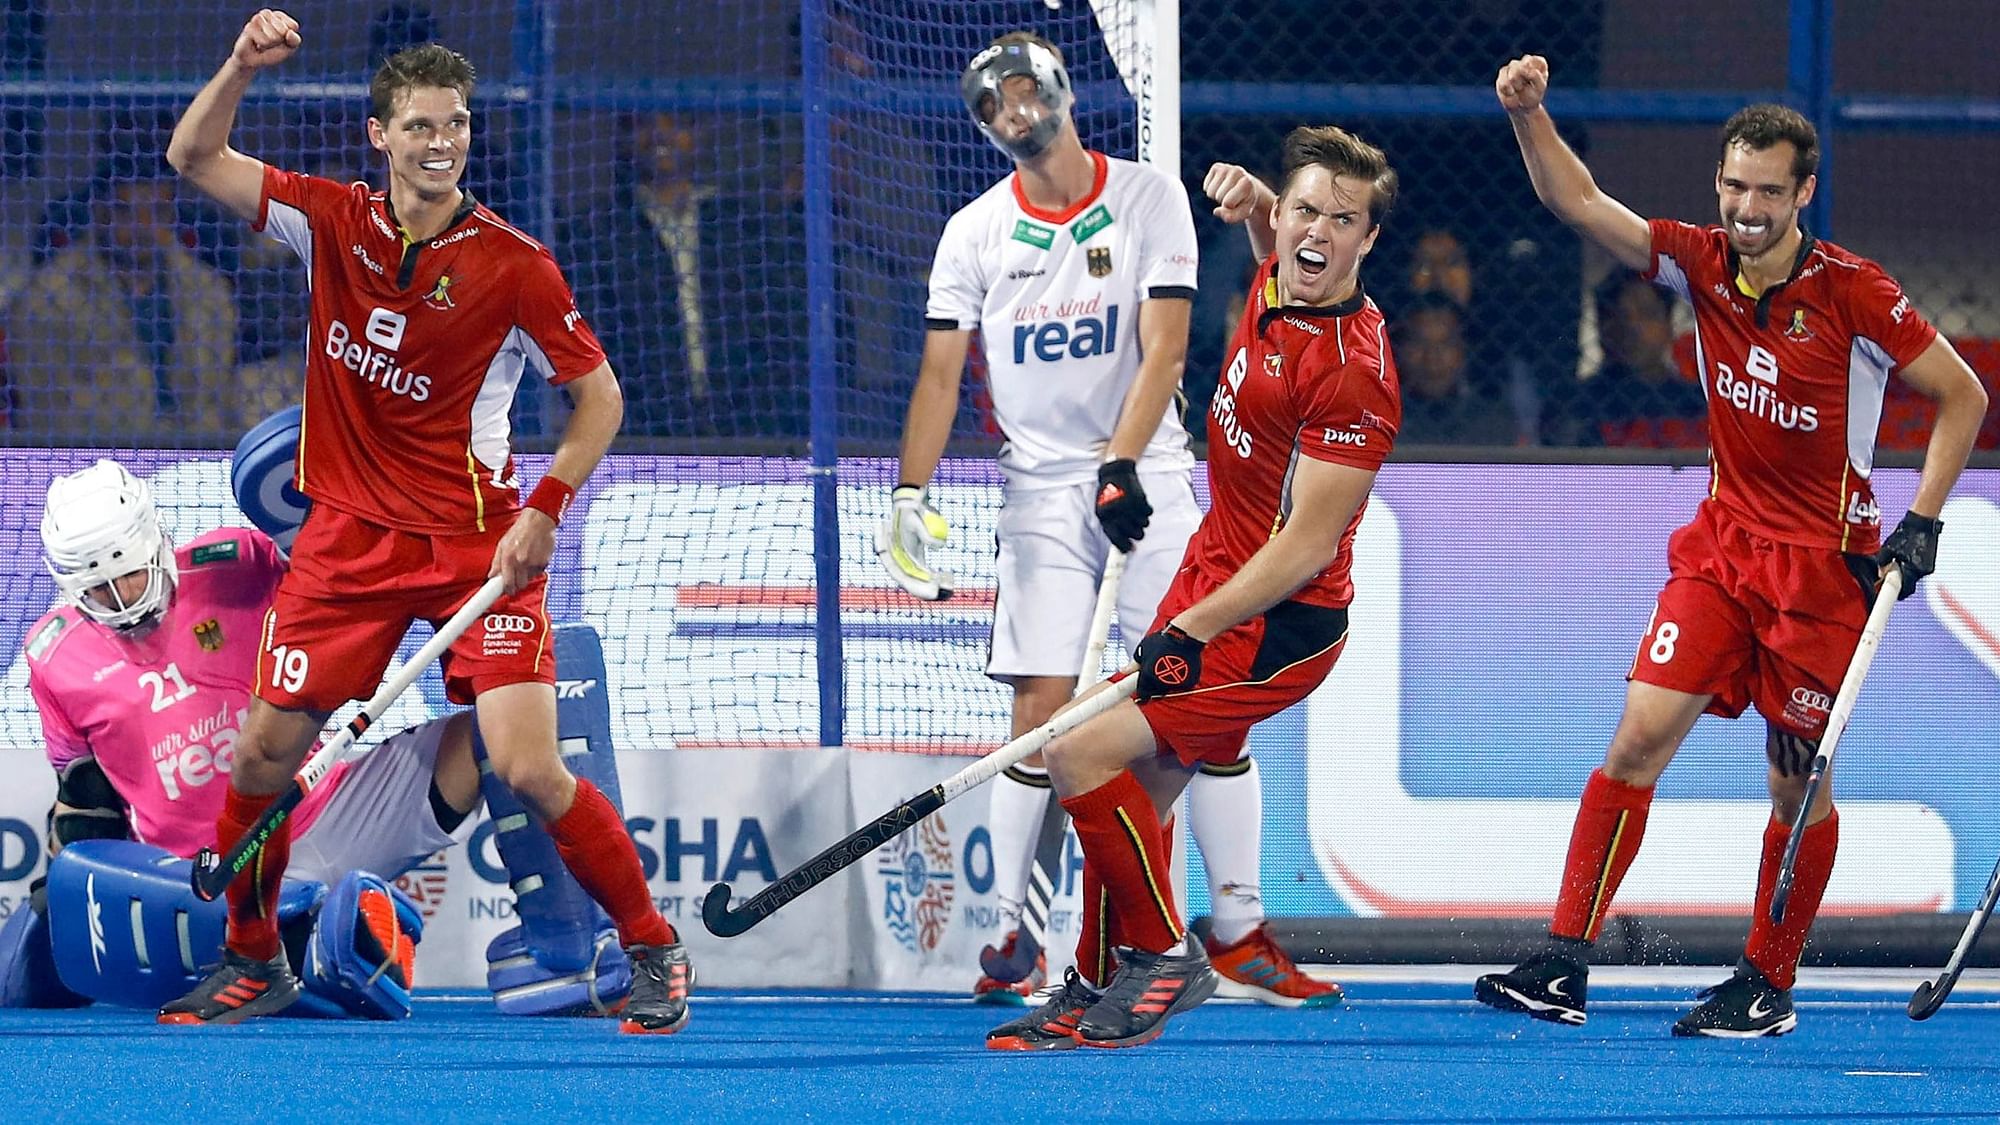 Olympic silver medallist Belgium qualified for the semi-finals of the men’s hockey World Cup for the first time ever.